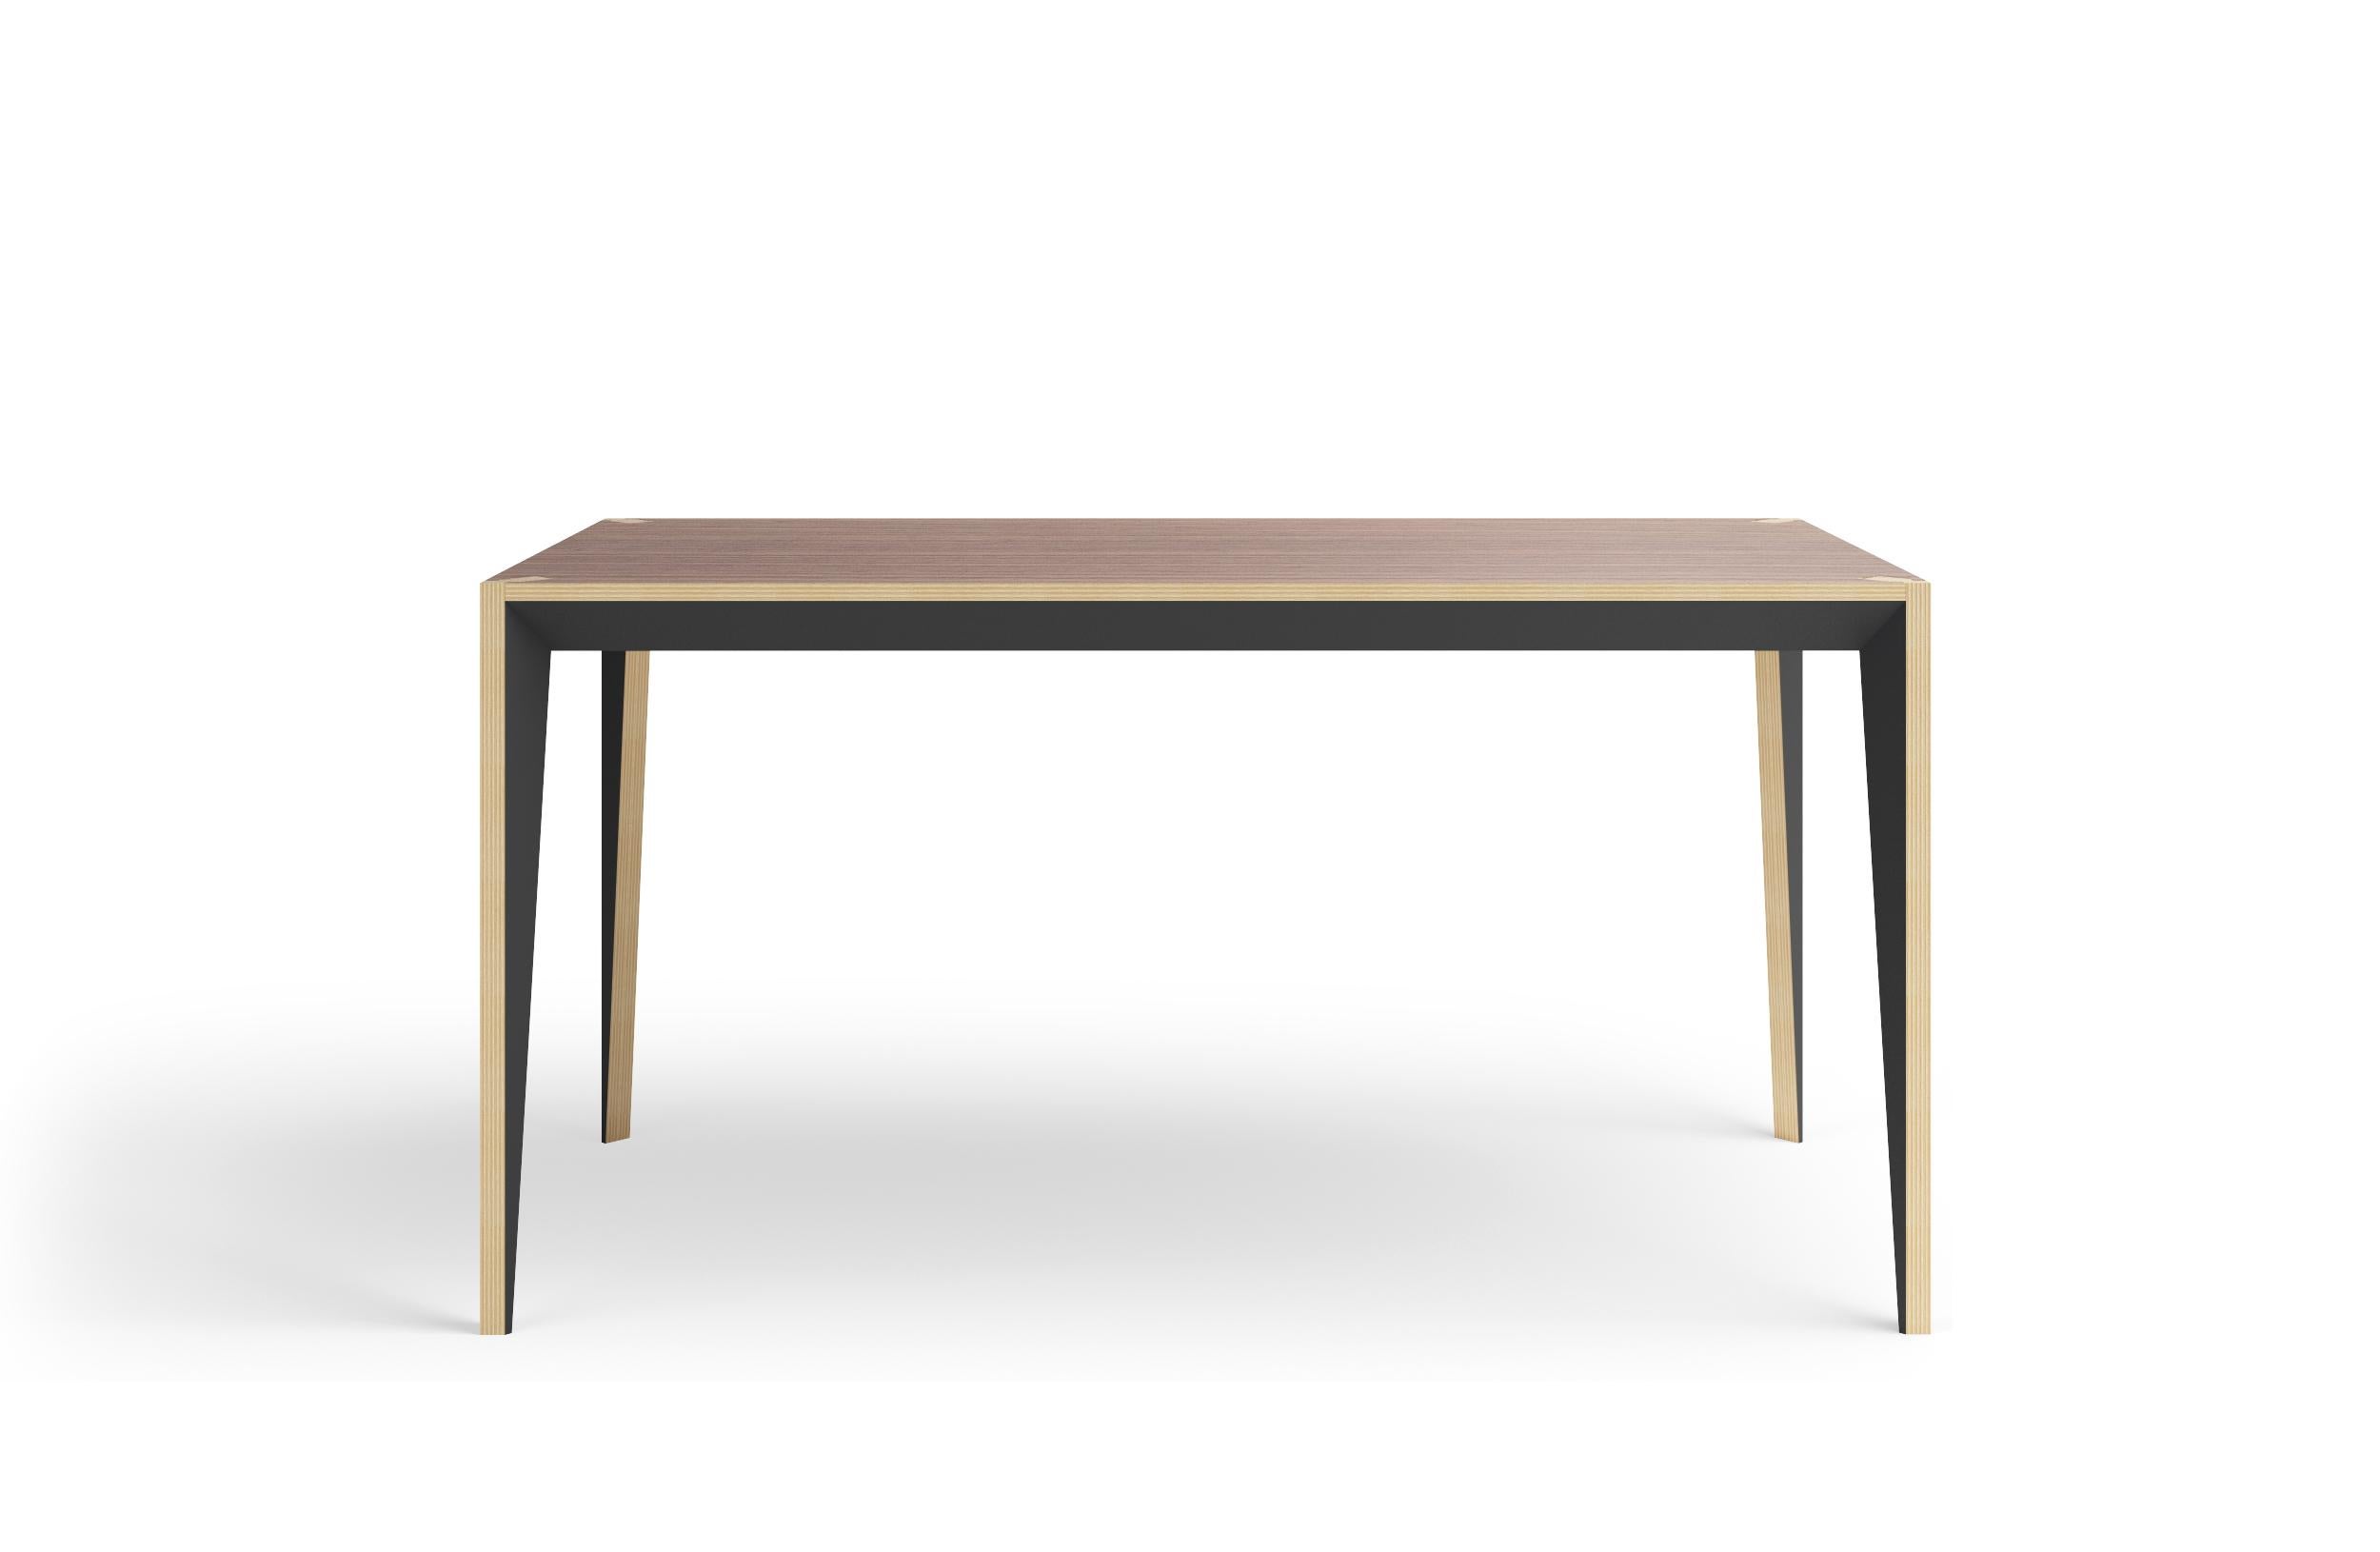 Merging clean lines with warm materials, the faceted geometry of the MiMi table creates a slender, elegant profile punctuated with painted surfaces that capture light. This modern and graceful design returns contemporary Italian craft to the office